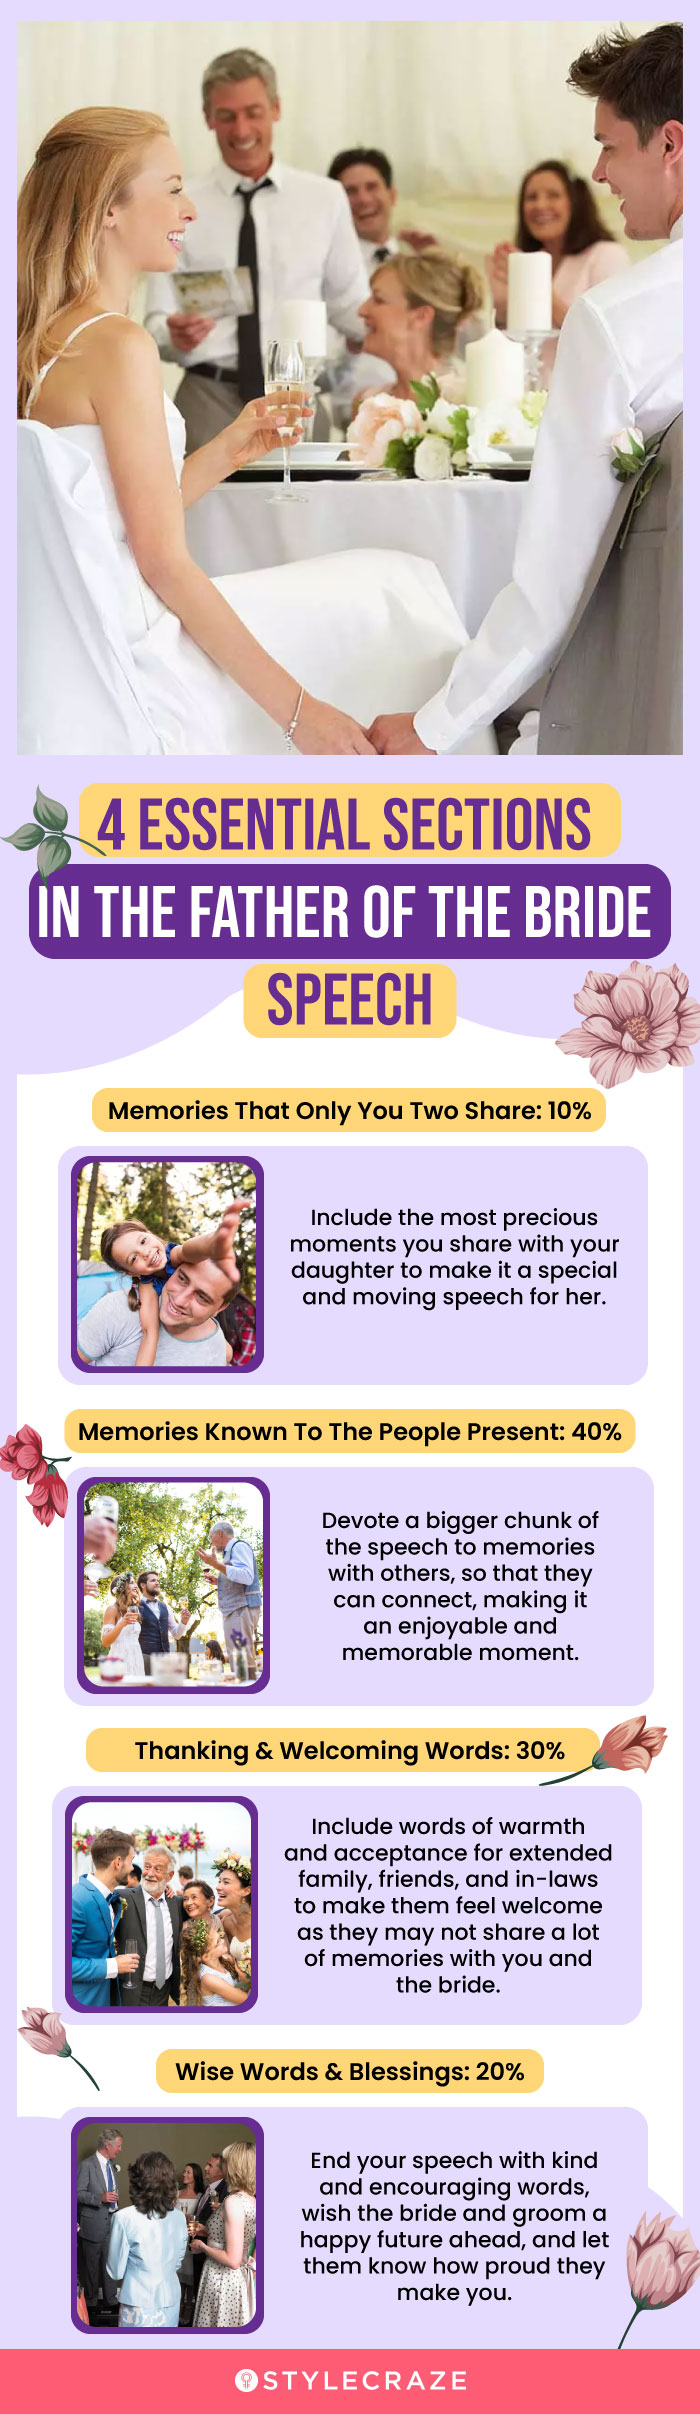 4 essential sections in the father of the bride speech (infographic)